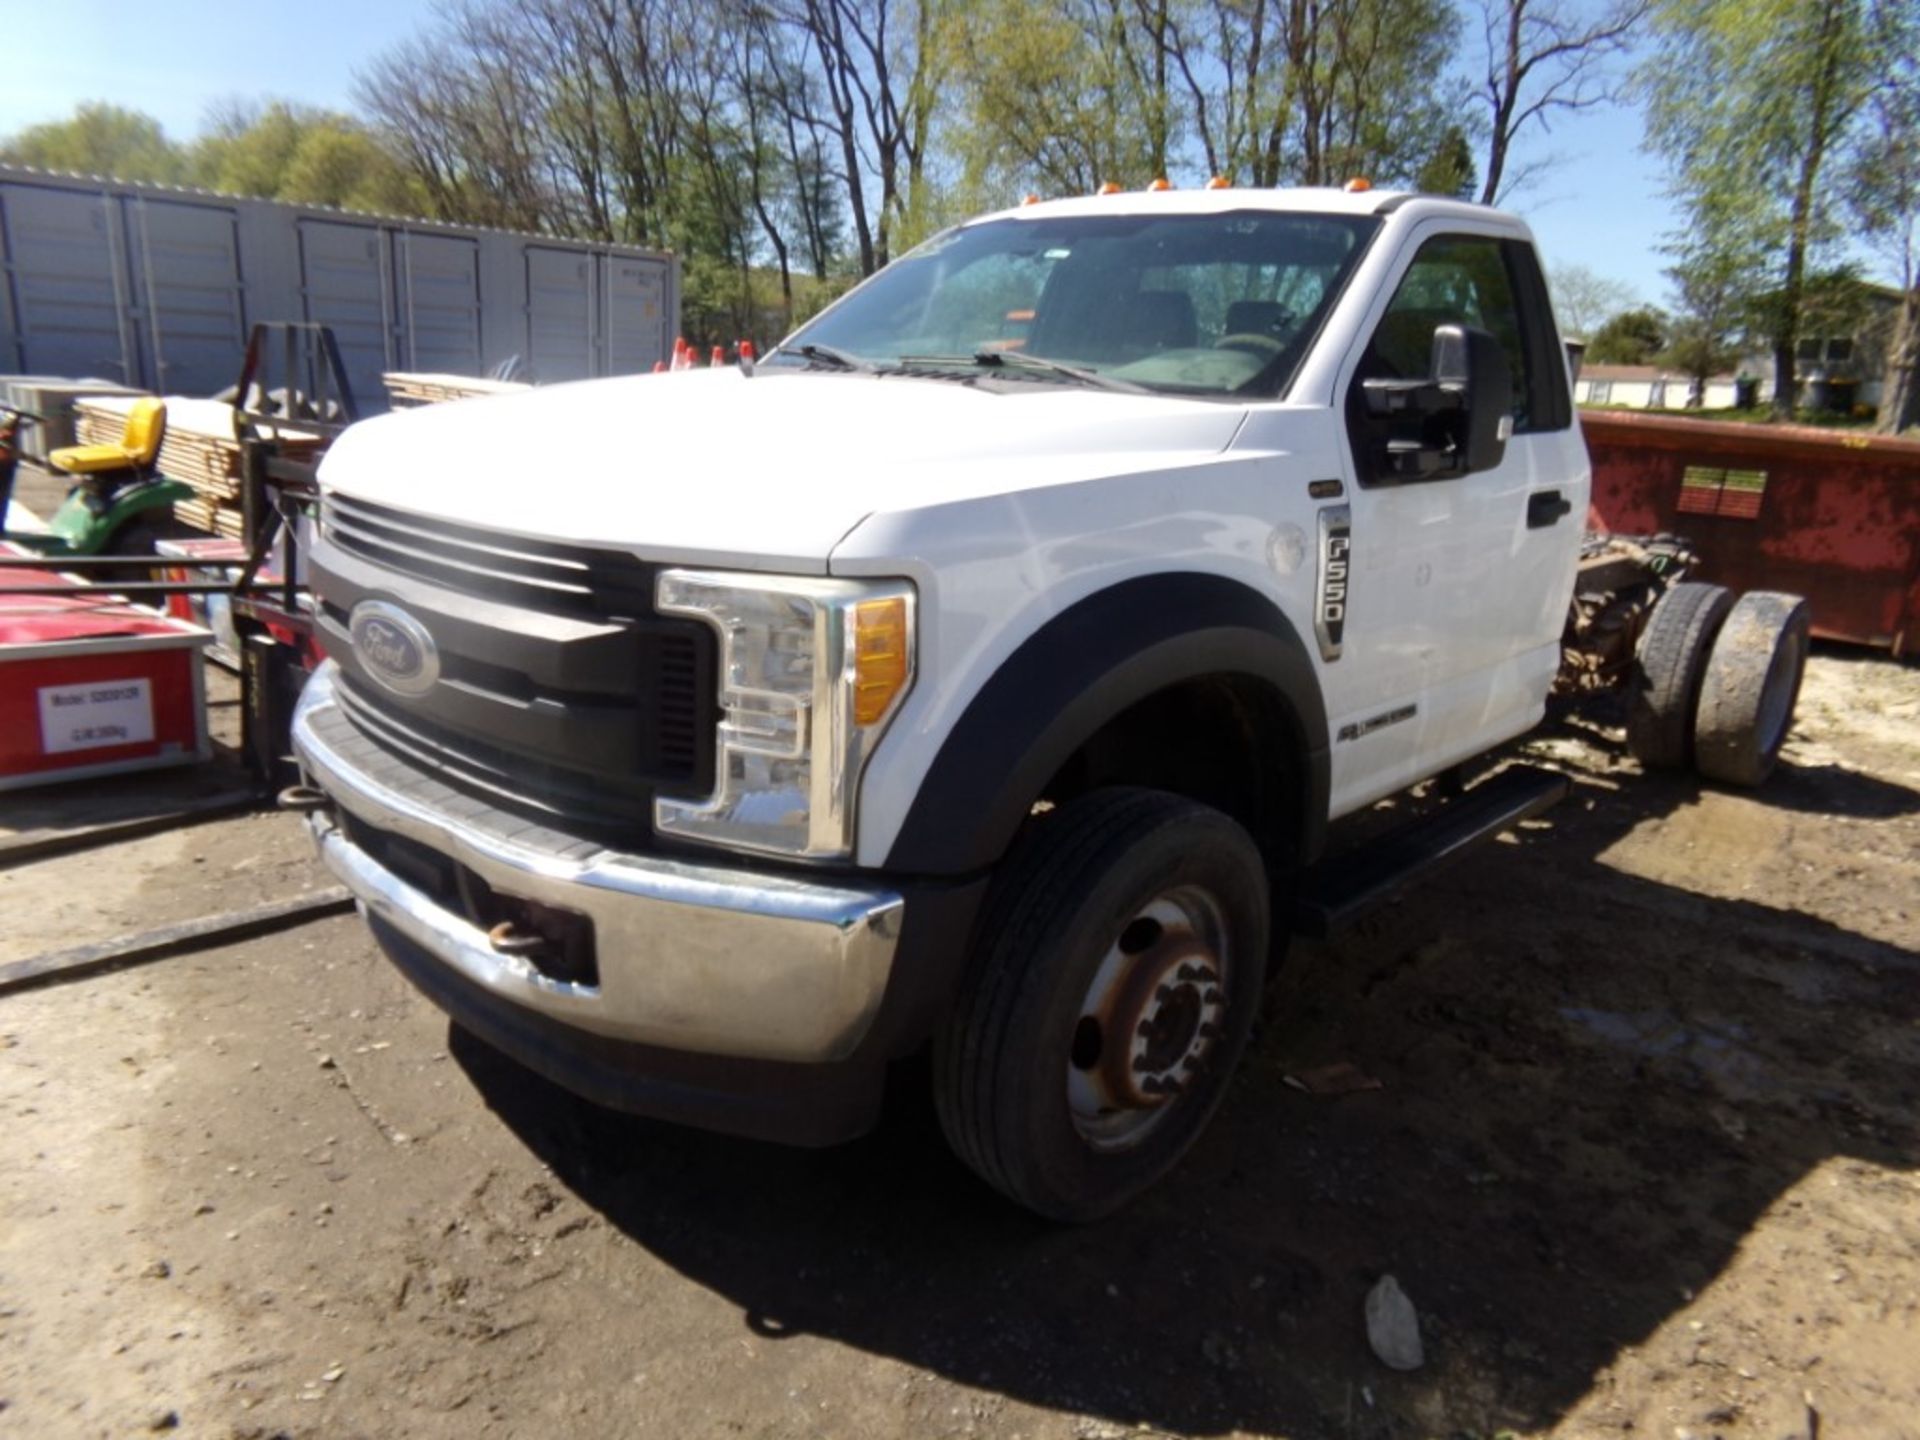 2017 Ford F-550, 6.7 L Power Stroke Diesel, Reg Cab And Chassis, 2 WD, 158,201 Mi, NOT RUNNING,